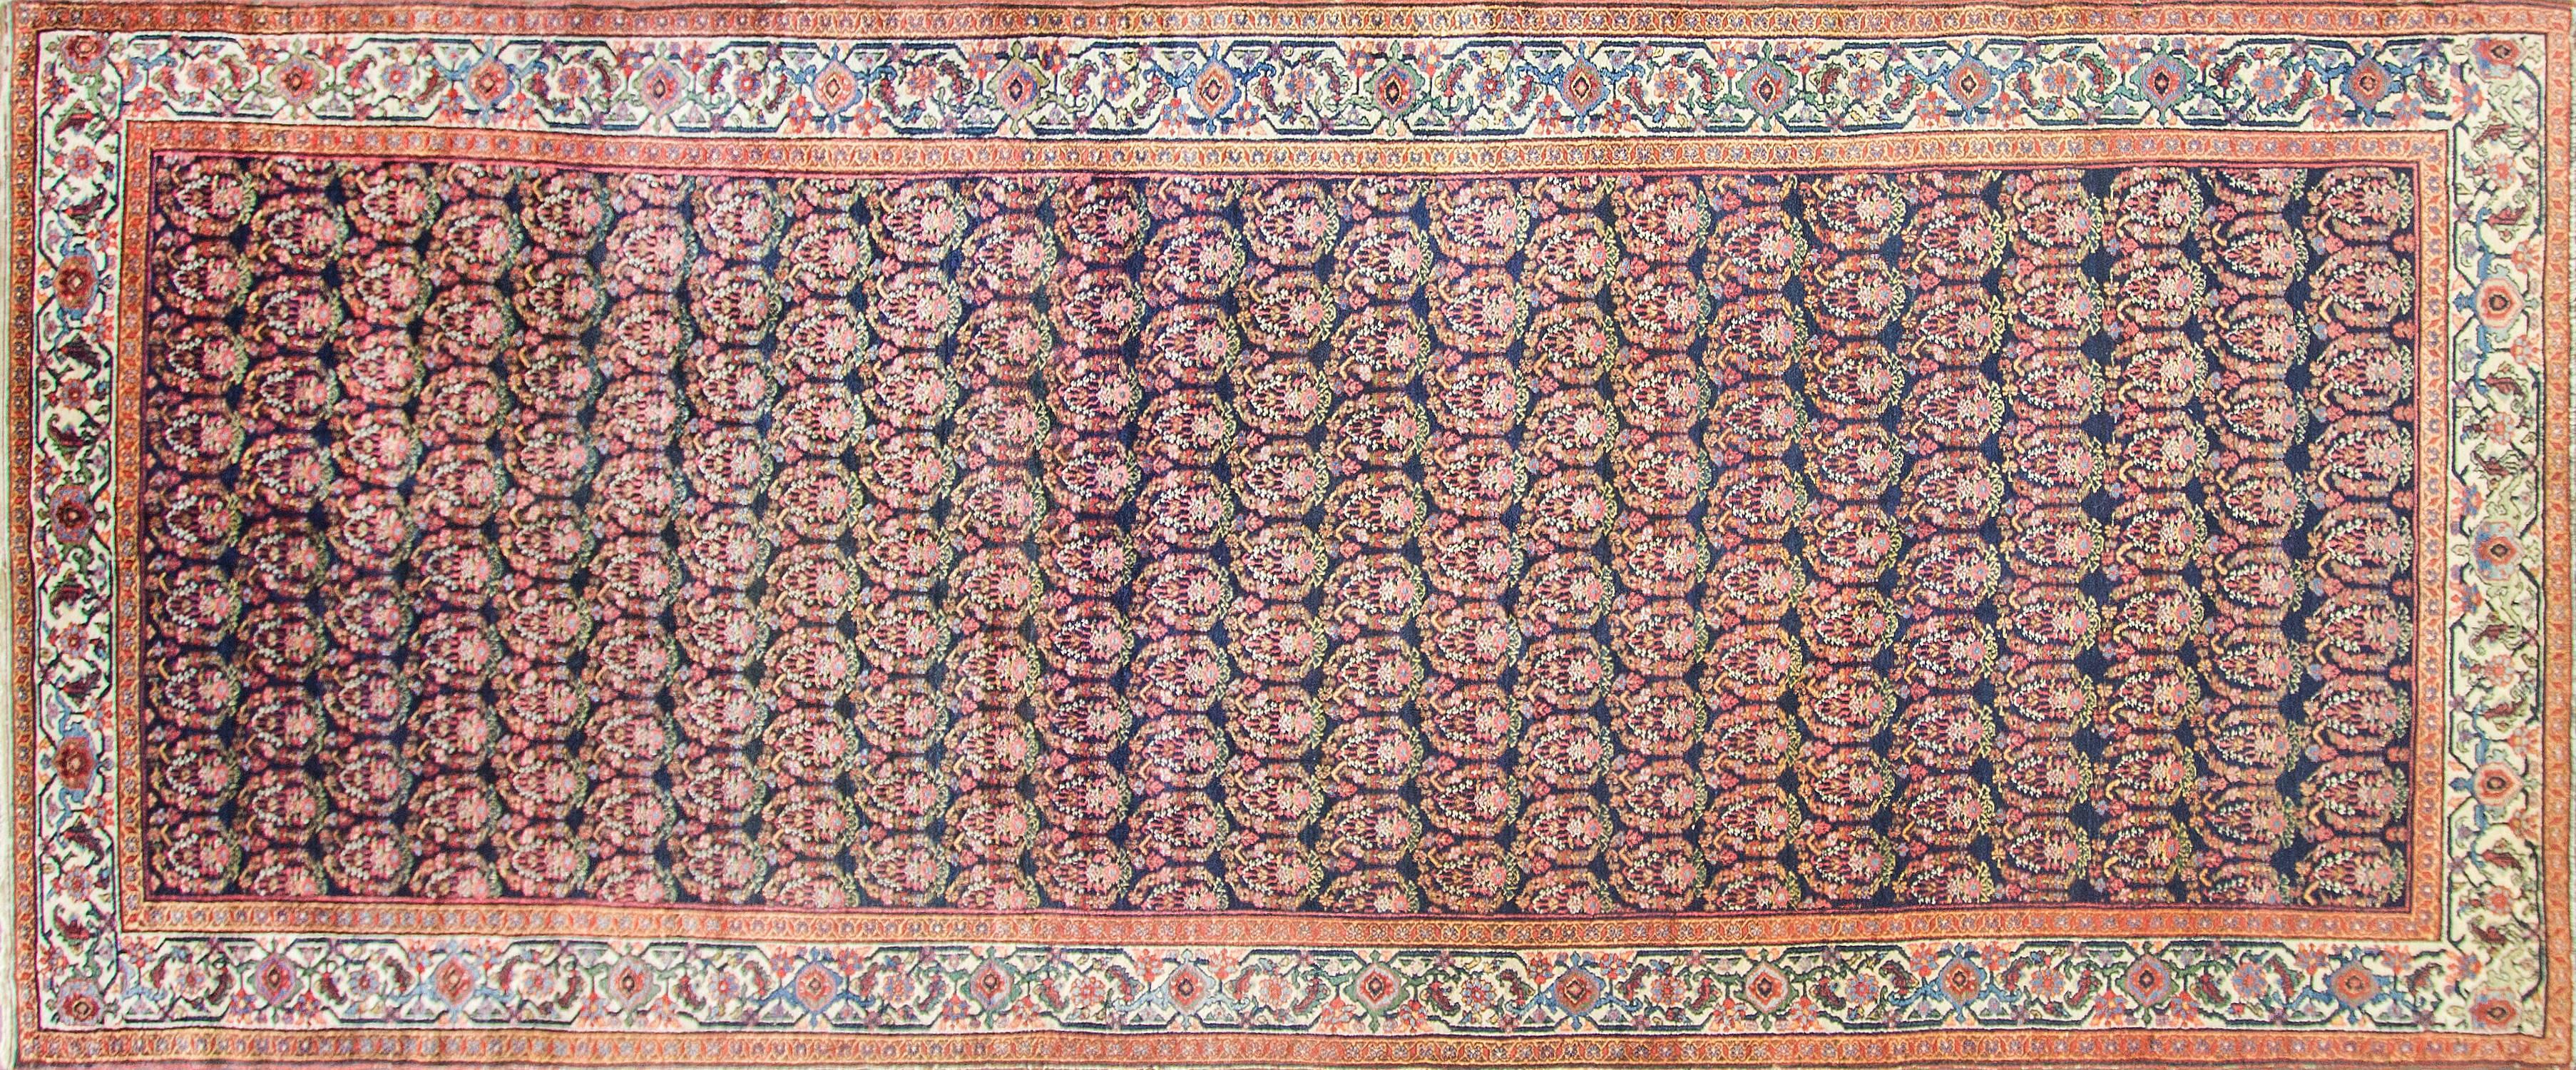 Remarkable fine antique Persian Senneh Malayer galley size carpet, circa 1900 in excellent condition.
The tribal weavers in Malayer were often Turkish, and they employed the Turkish knot. The Gourde is a symmetrical knot, as opposed to the